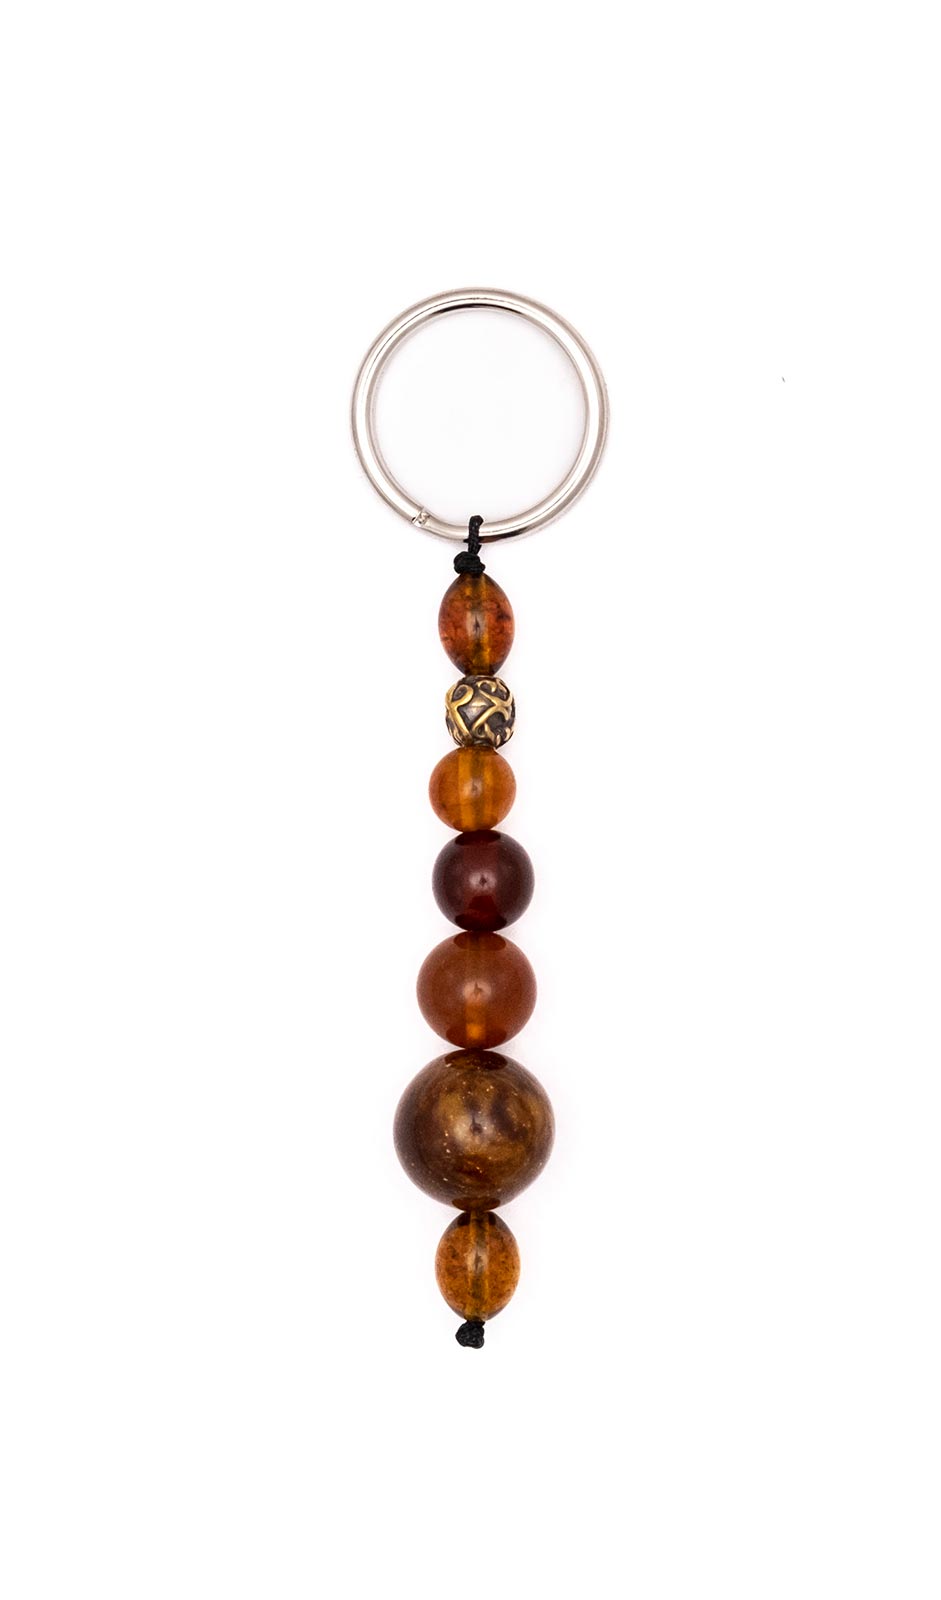 Key Rings made of solid baltic amber